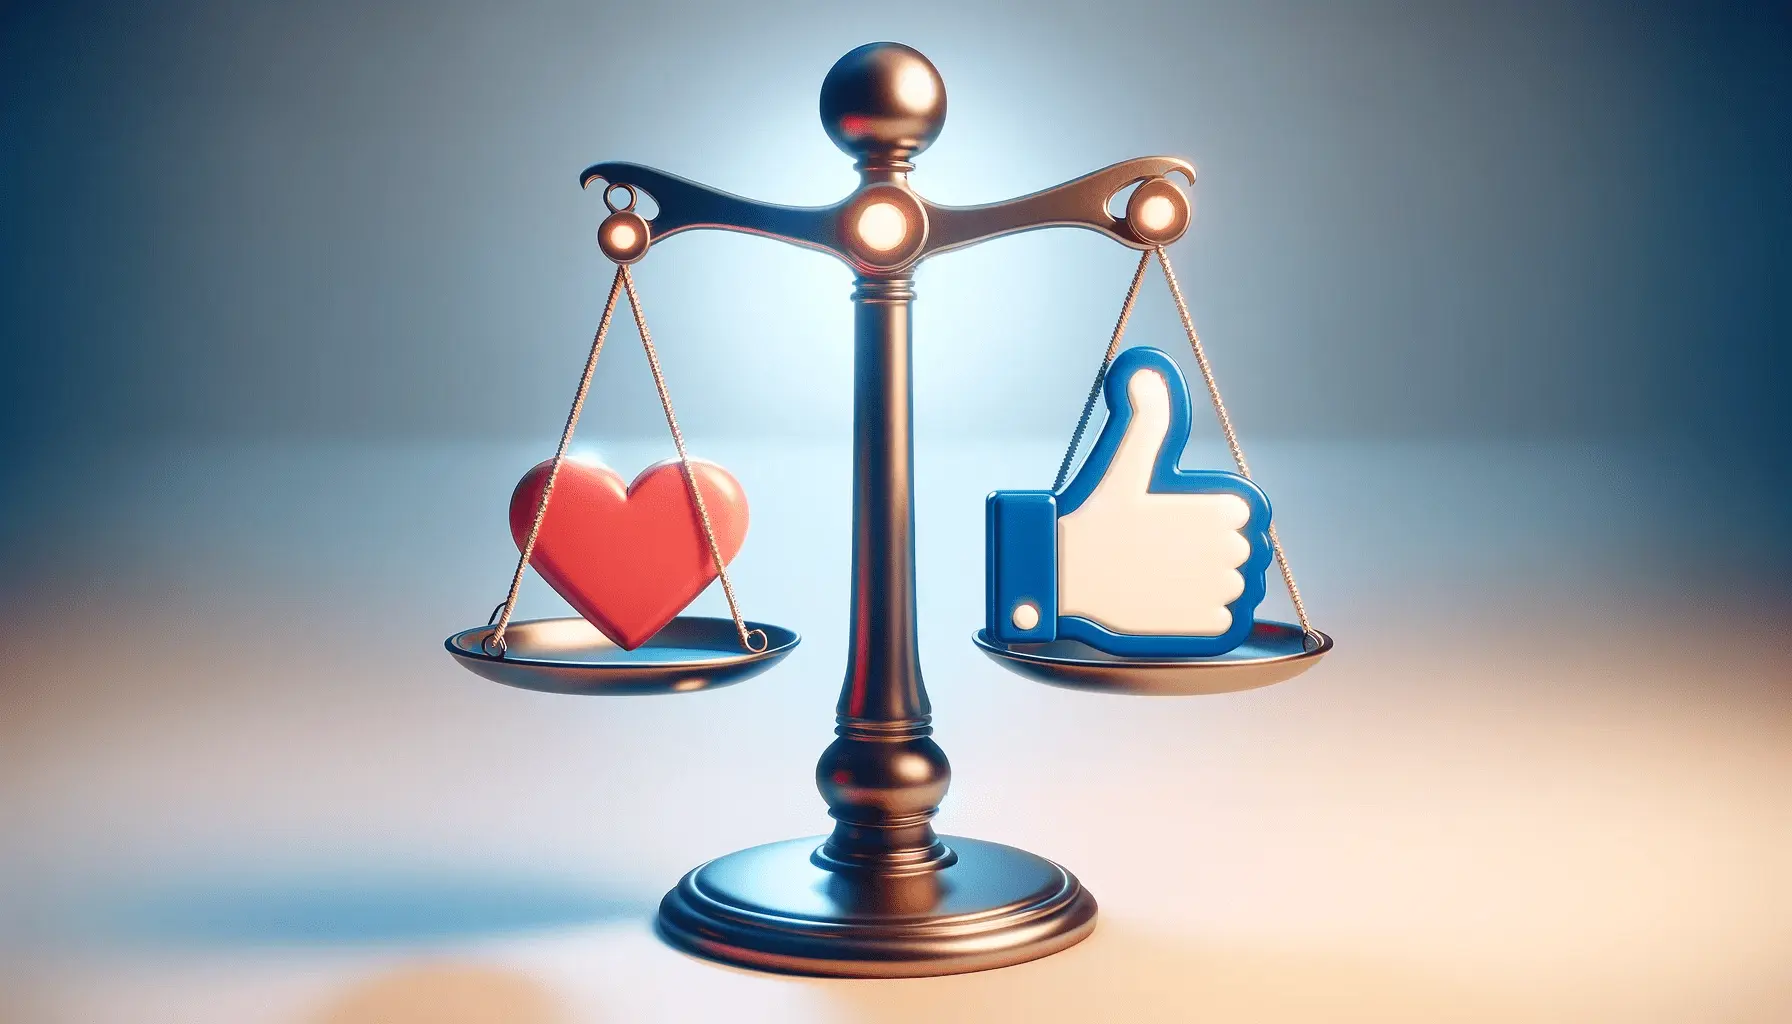 Ad Ethics: Ethical Practices in Social Media Ads